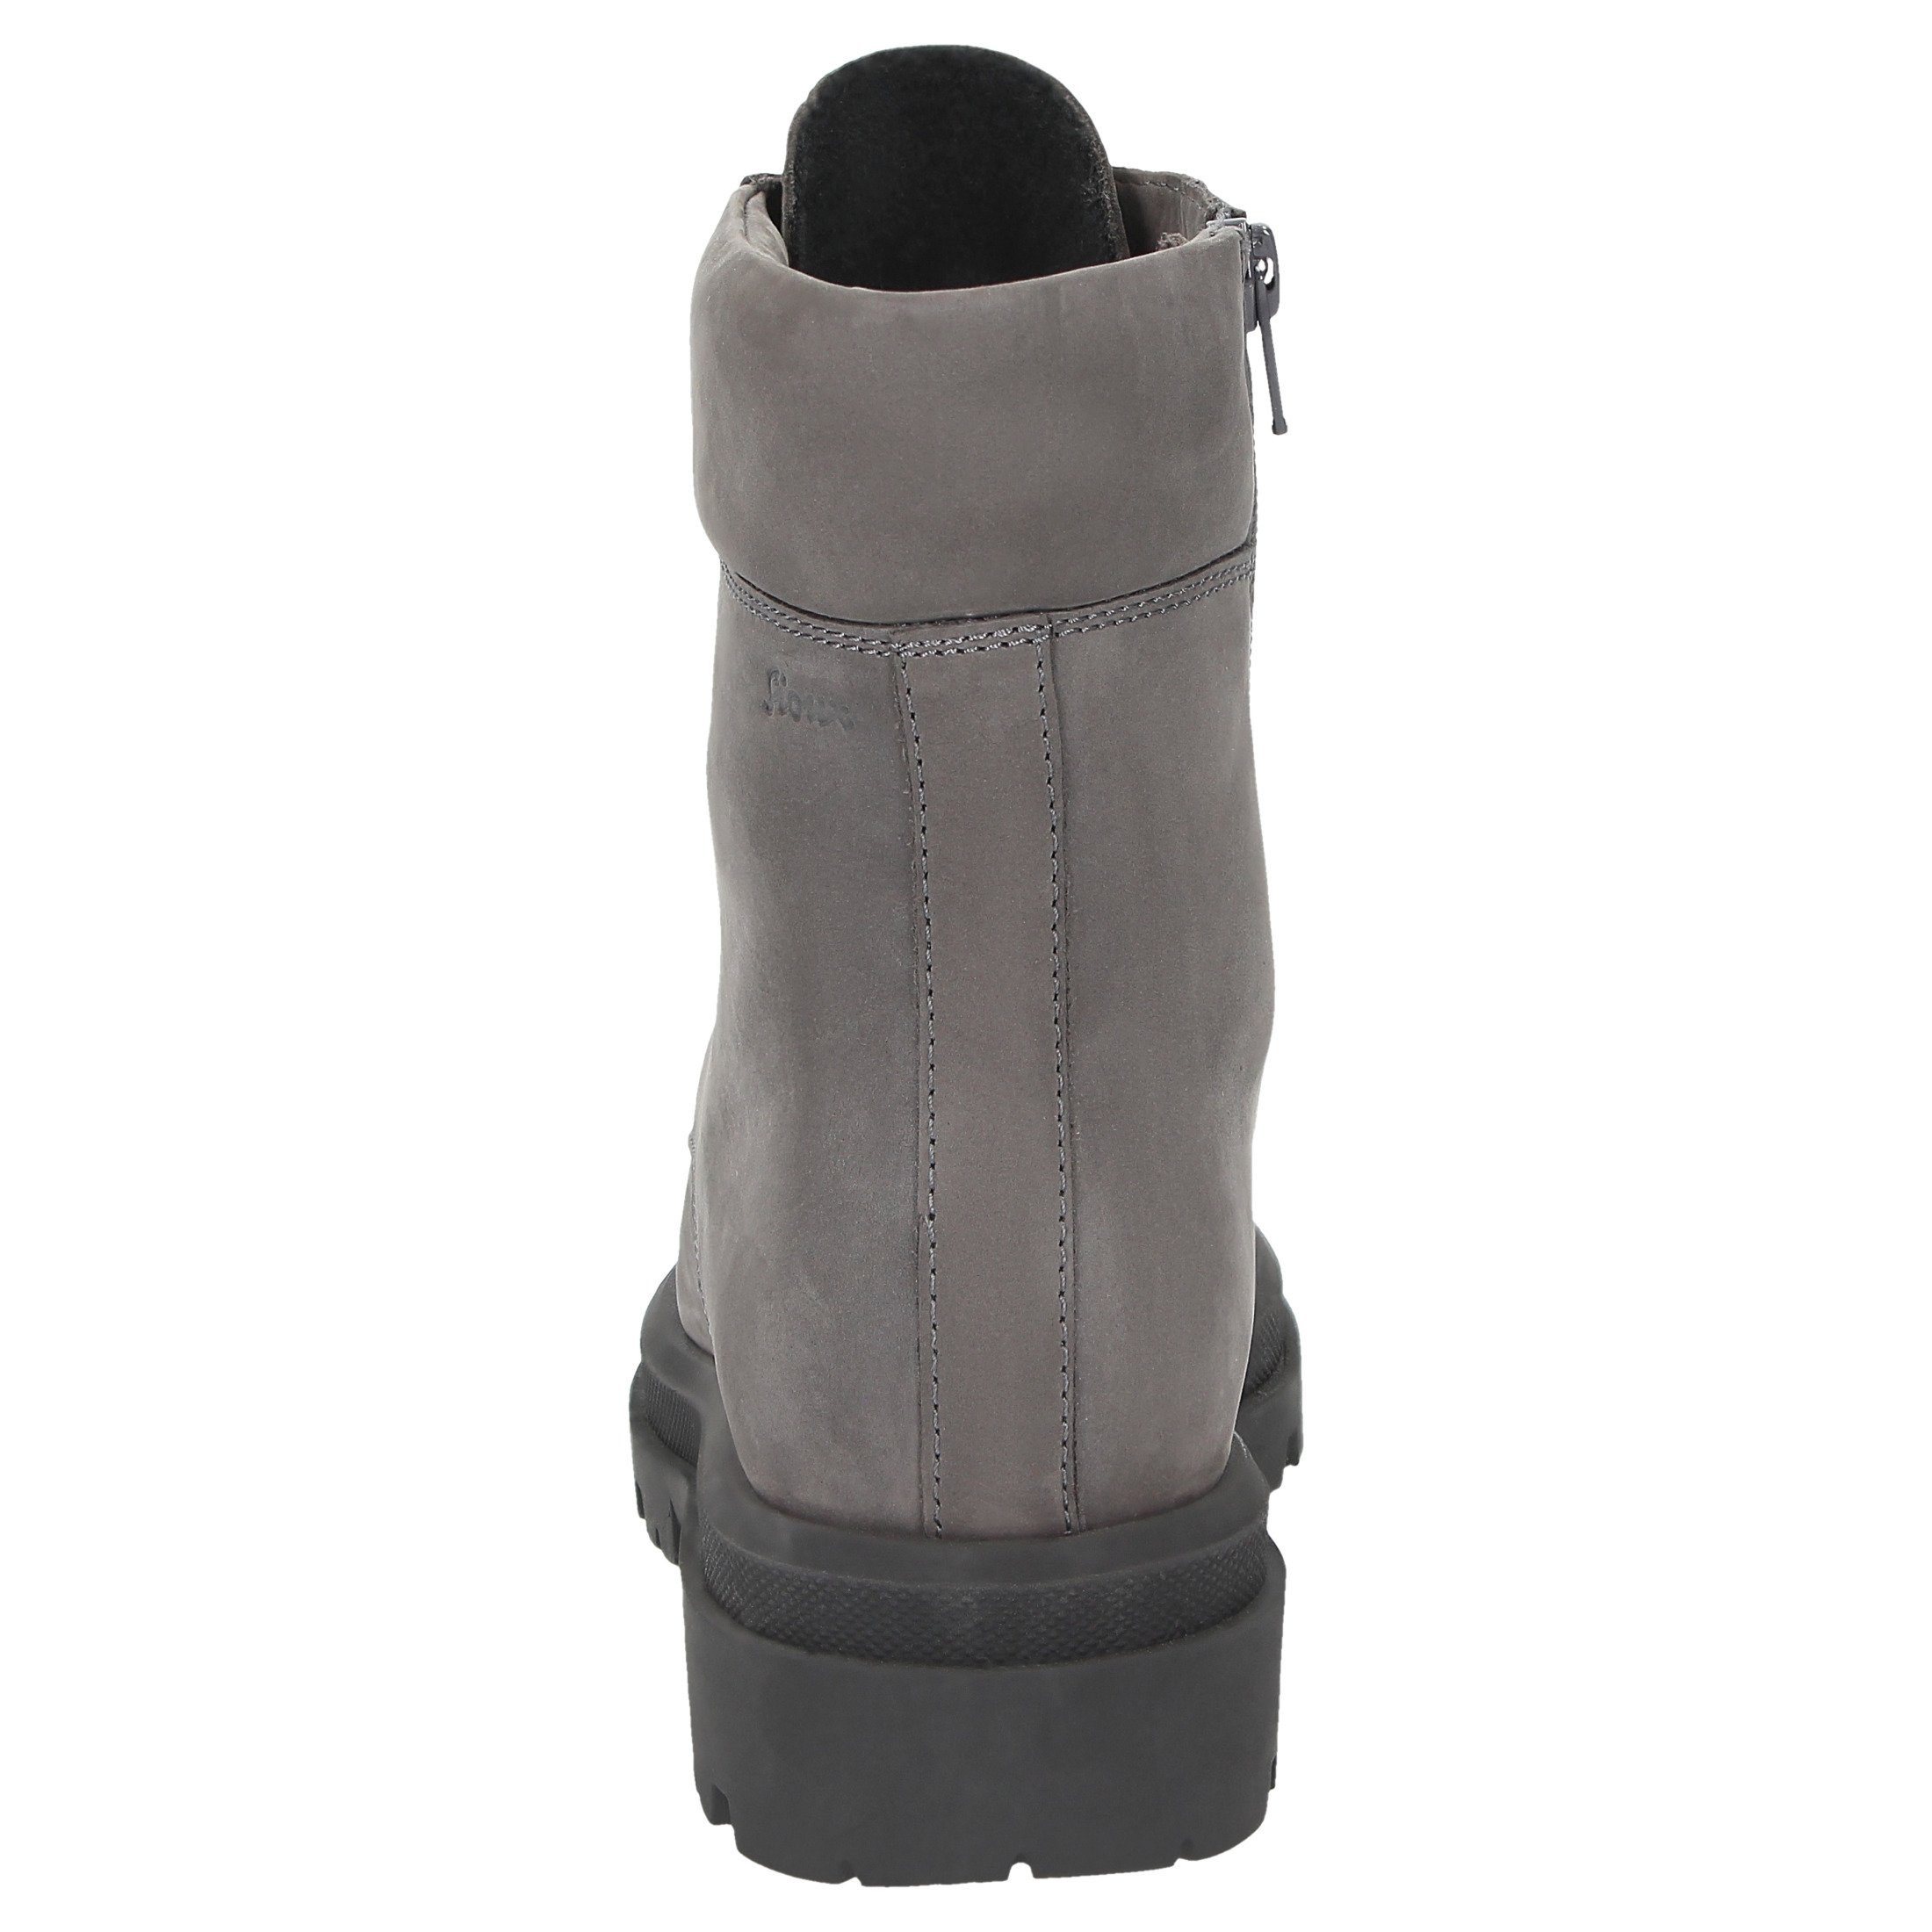 Kuimba-704 Stiefel SIOUX